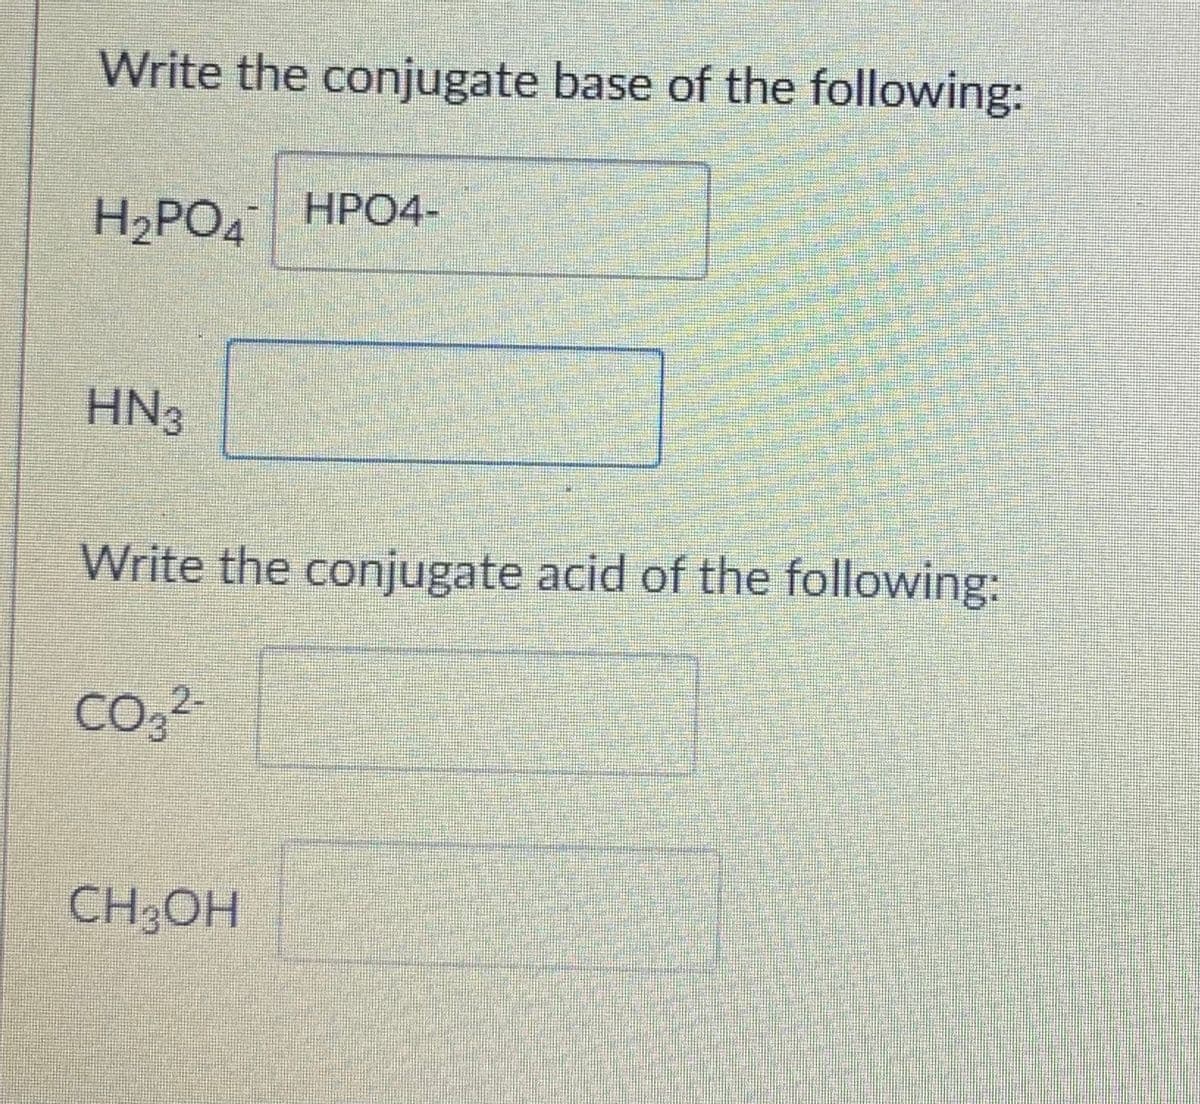 Write the conjugate base of the following:
H₂PO4 HPO4-
HN3
Write the conjugate acid of the following:
CO3²-
CH3OH